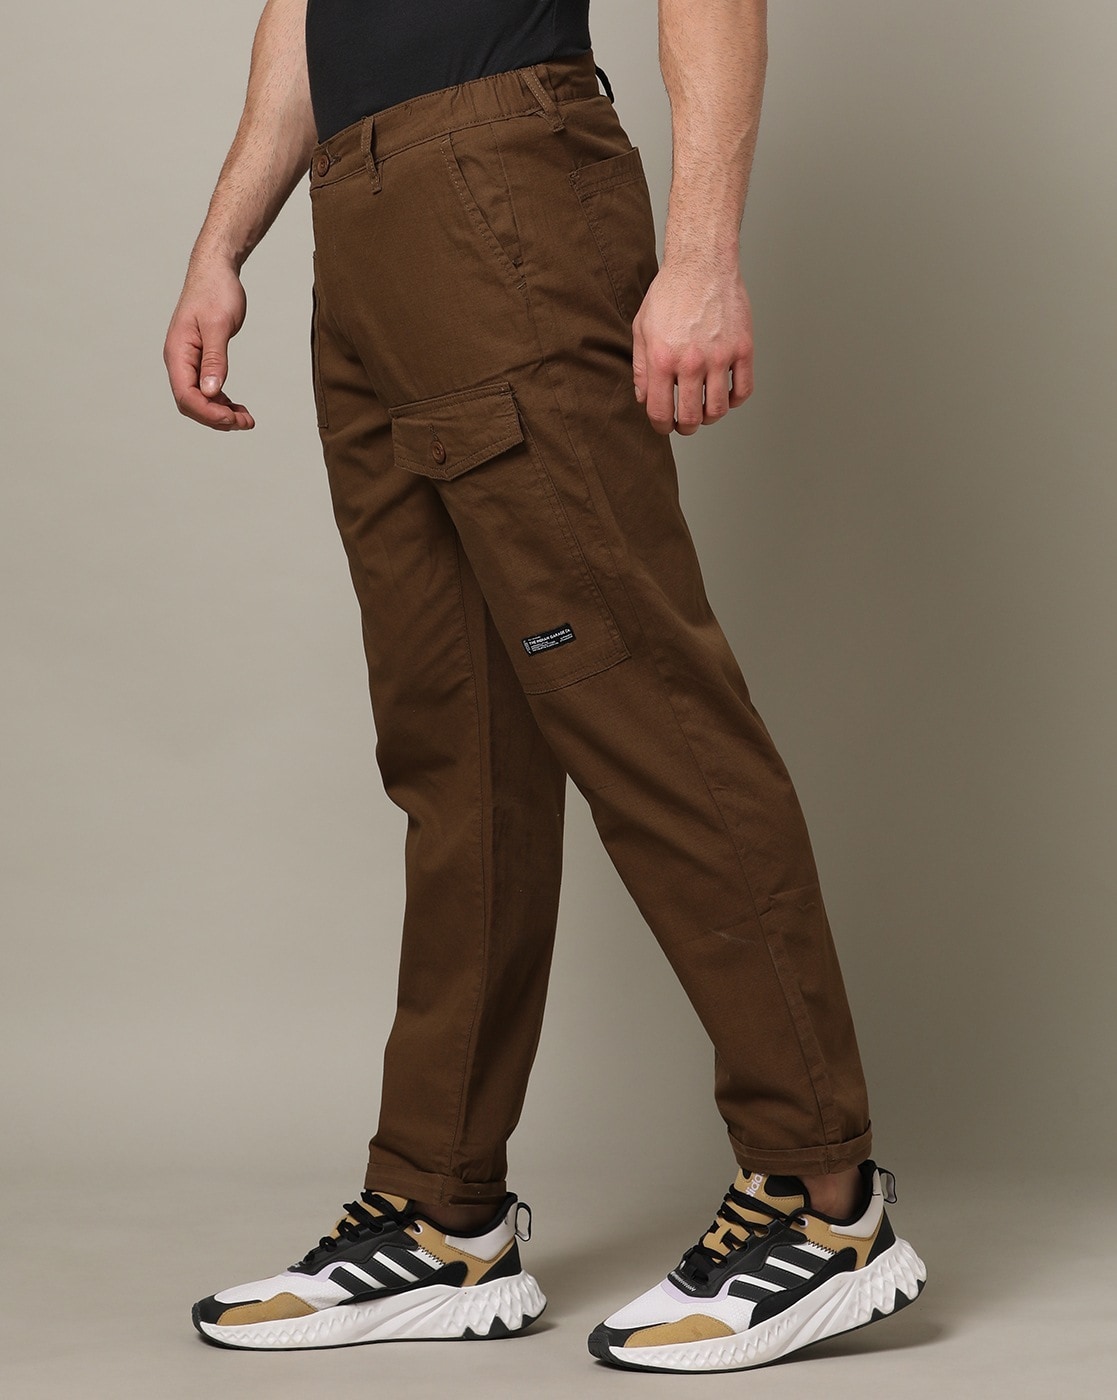 Brown Cargo Pants Men Spring And Summer Pant Casual All Match Solid Color  Painting Cotton Linen Loose Plus Size Trouser Fashion Beach Pockets Pant -  Walmart.com